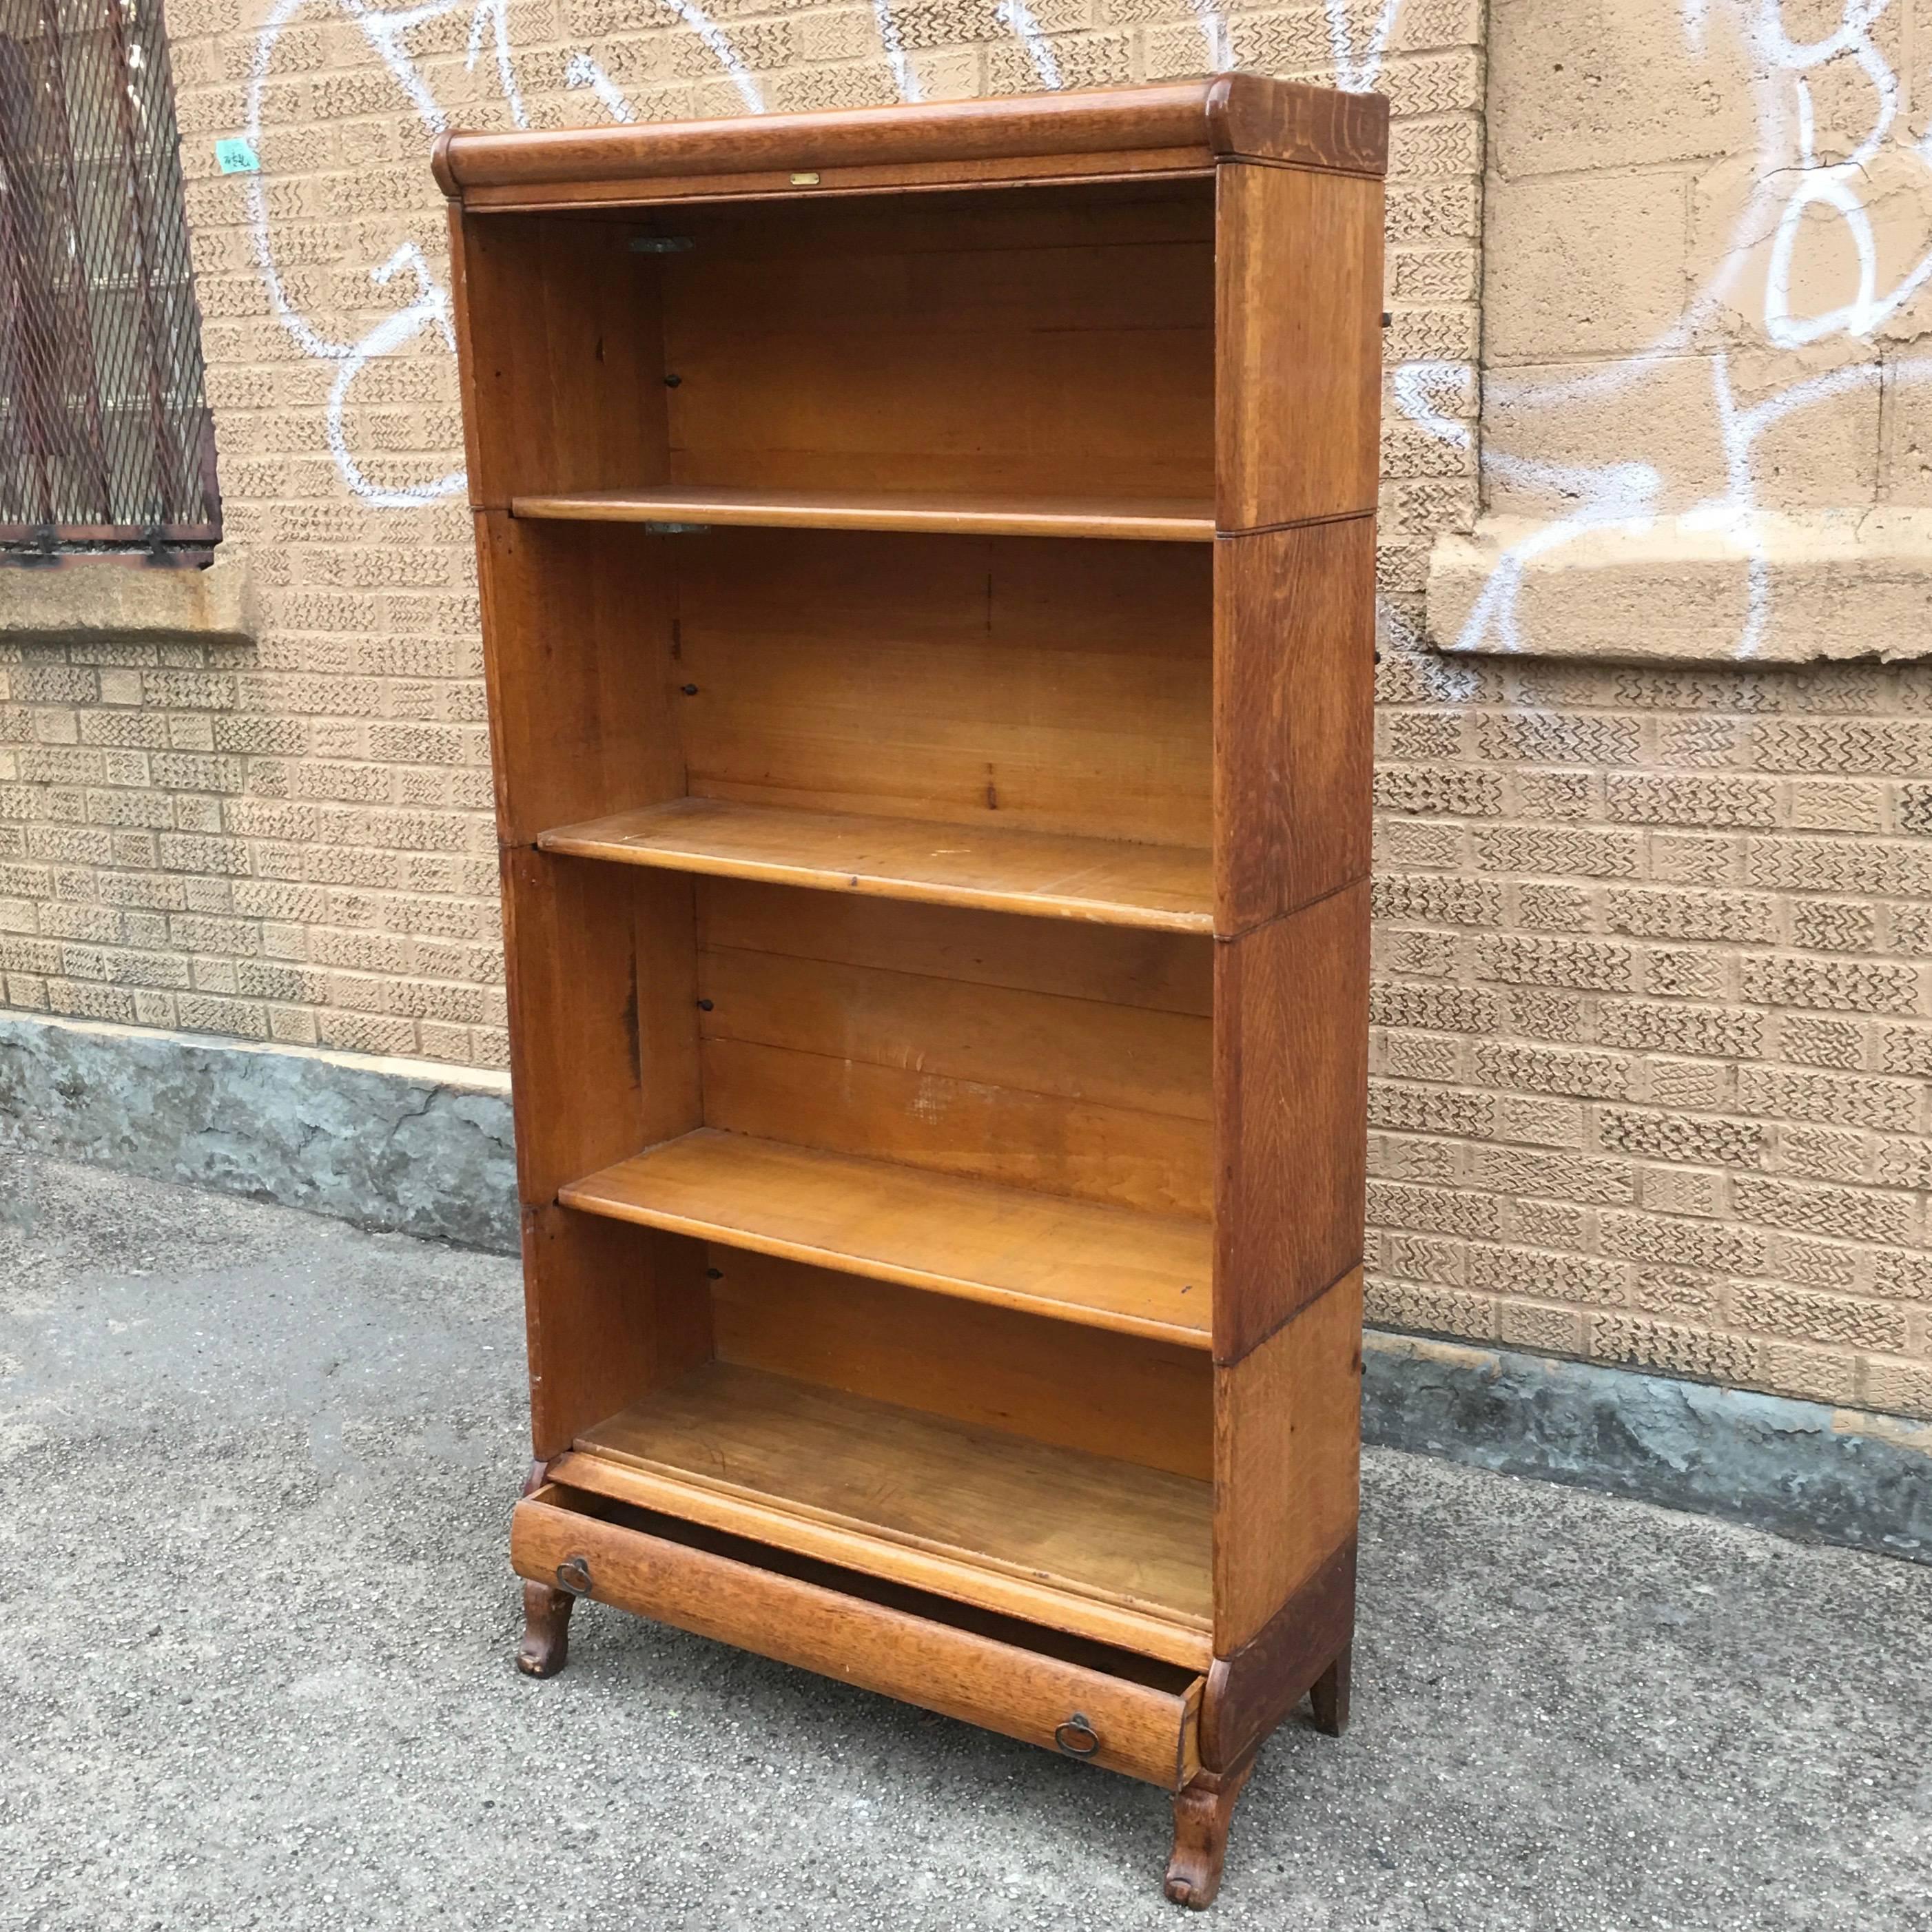 Rare, antique, early 20th century, solid oak, barrister book case by Globe Wernicke features open, modular, stacking shelves with wonderful details and a bottom drawer with brass pulls.  The shelf heights vary from bottom 12.5